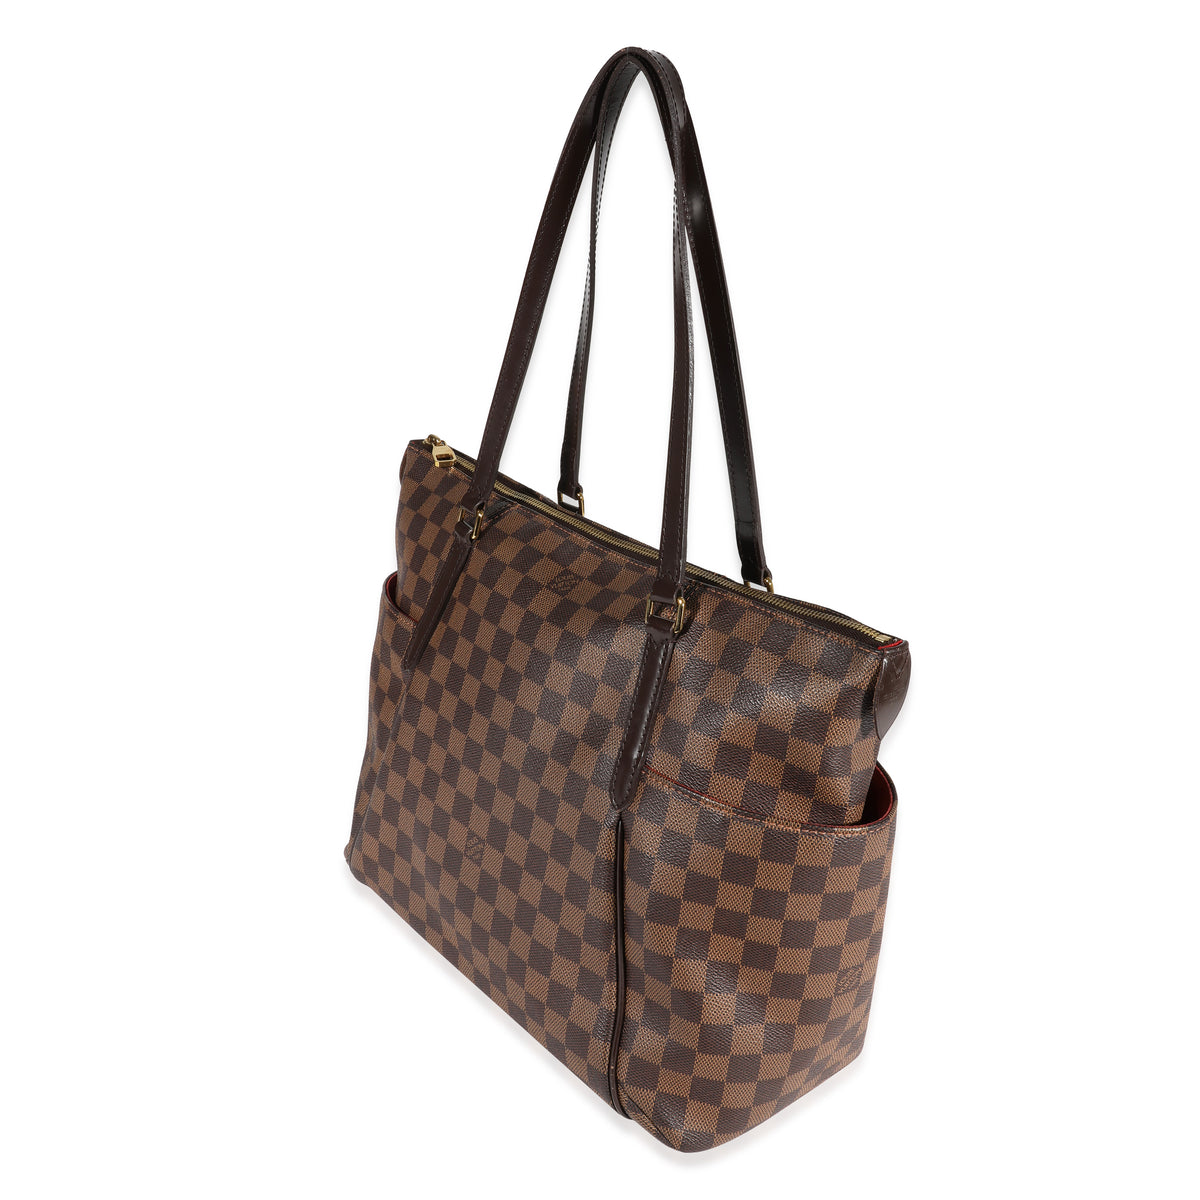 Louis Vuitton Totally MM in Damier Ebene - SOLD